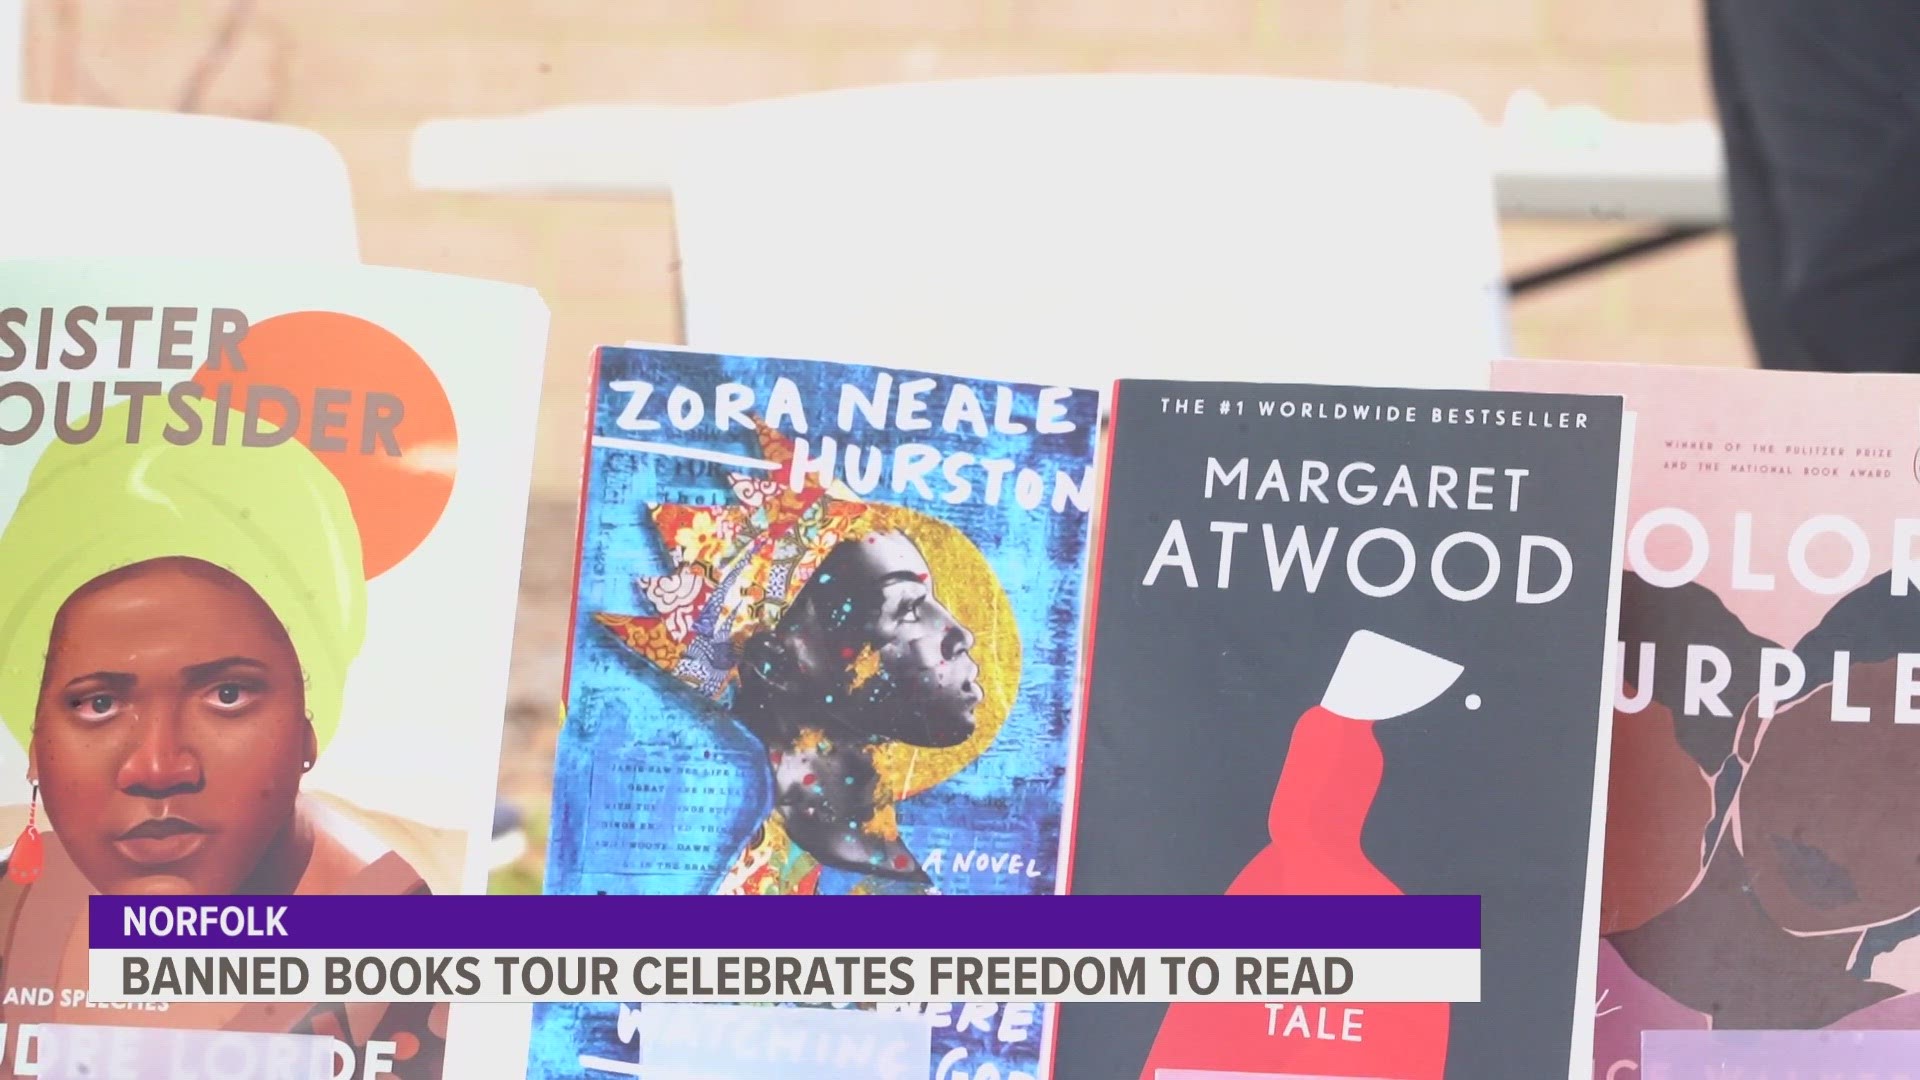 The New Republic's Banned Books Tour is visiting states with the most book censorship, which includes Texas, Florida and Virginia.